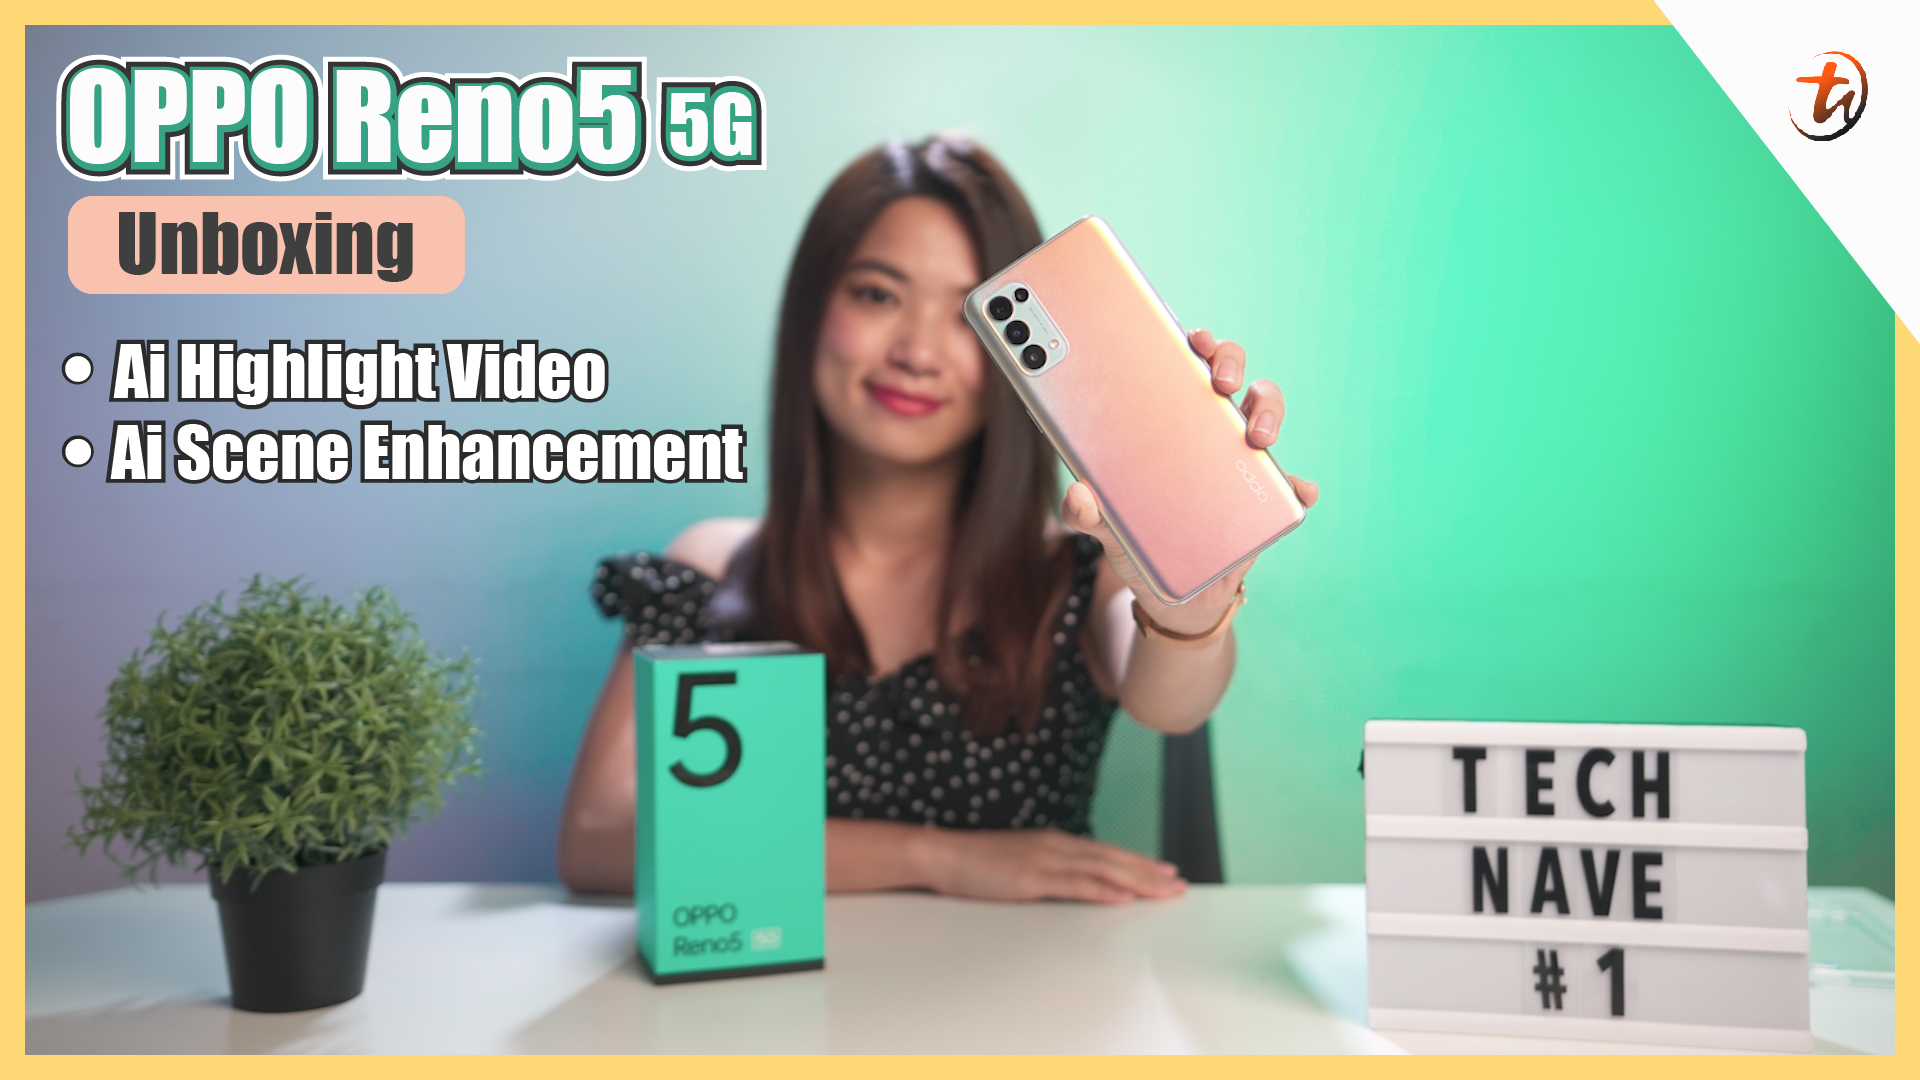 OPPO Reno5 5G - Amazing camera features | TechNave Unboxing and Hands-On Video